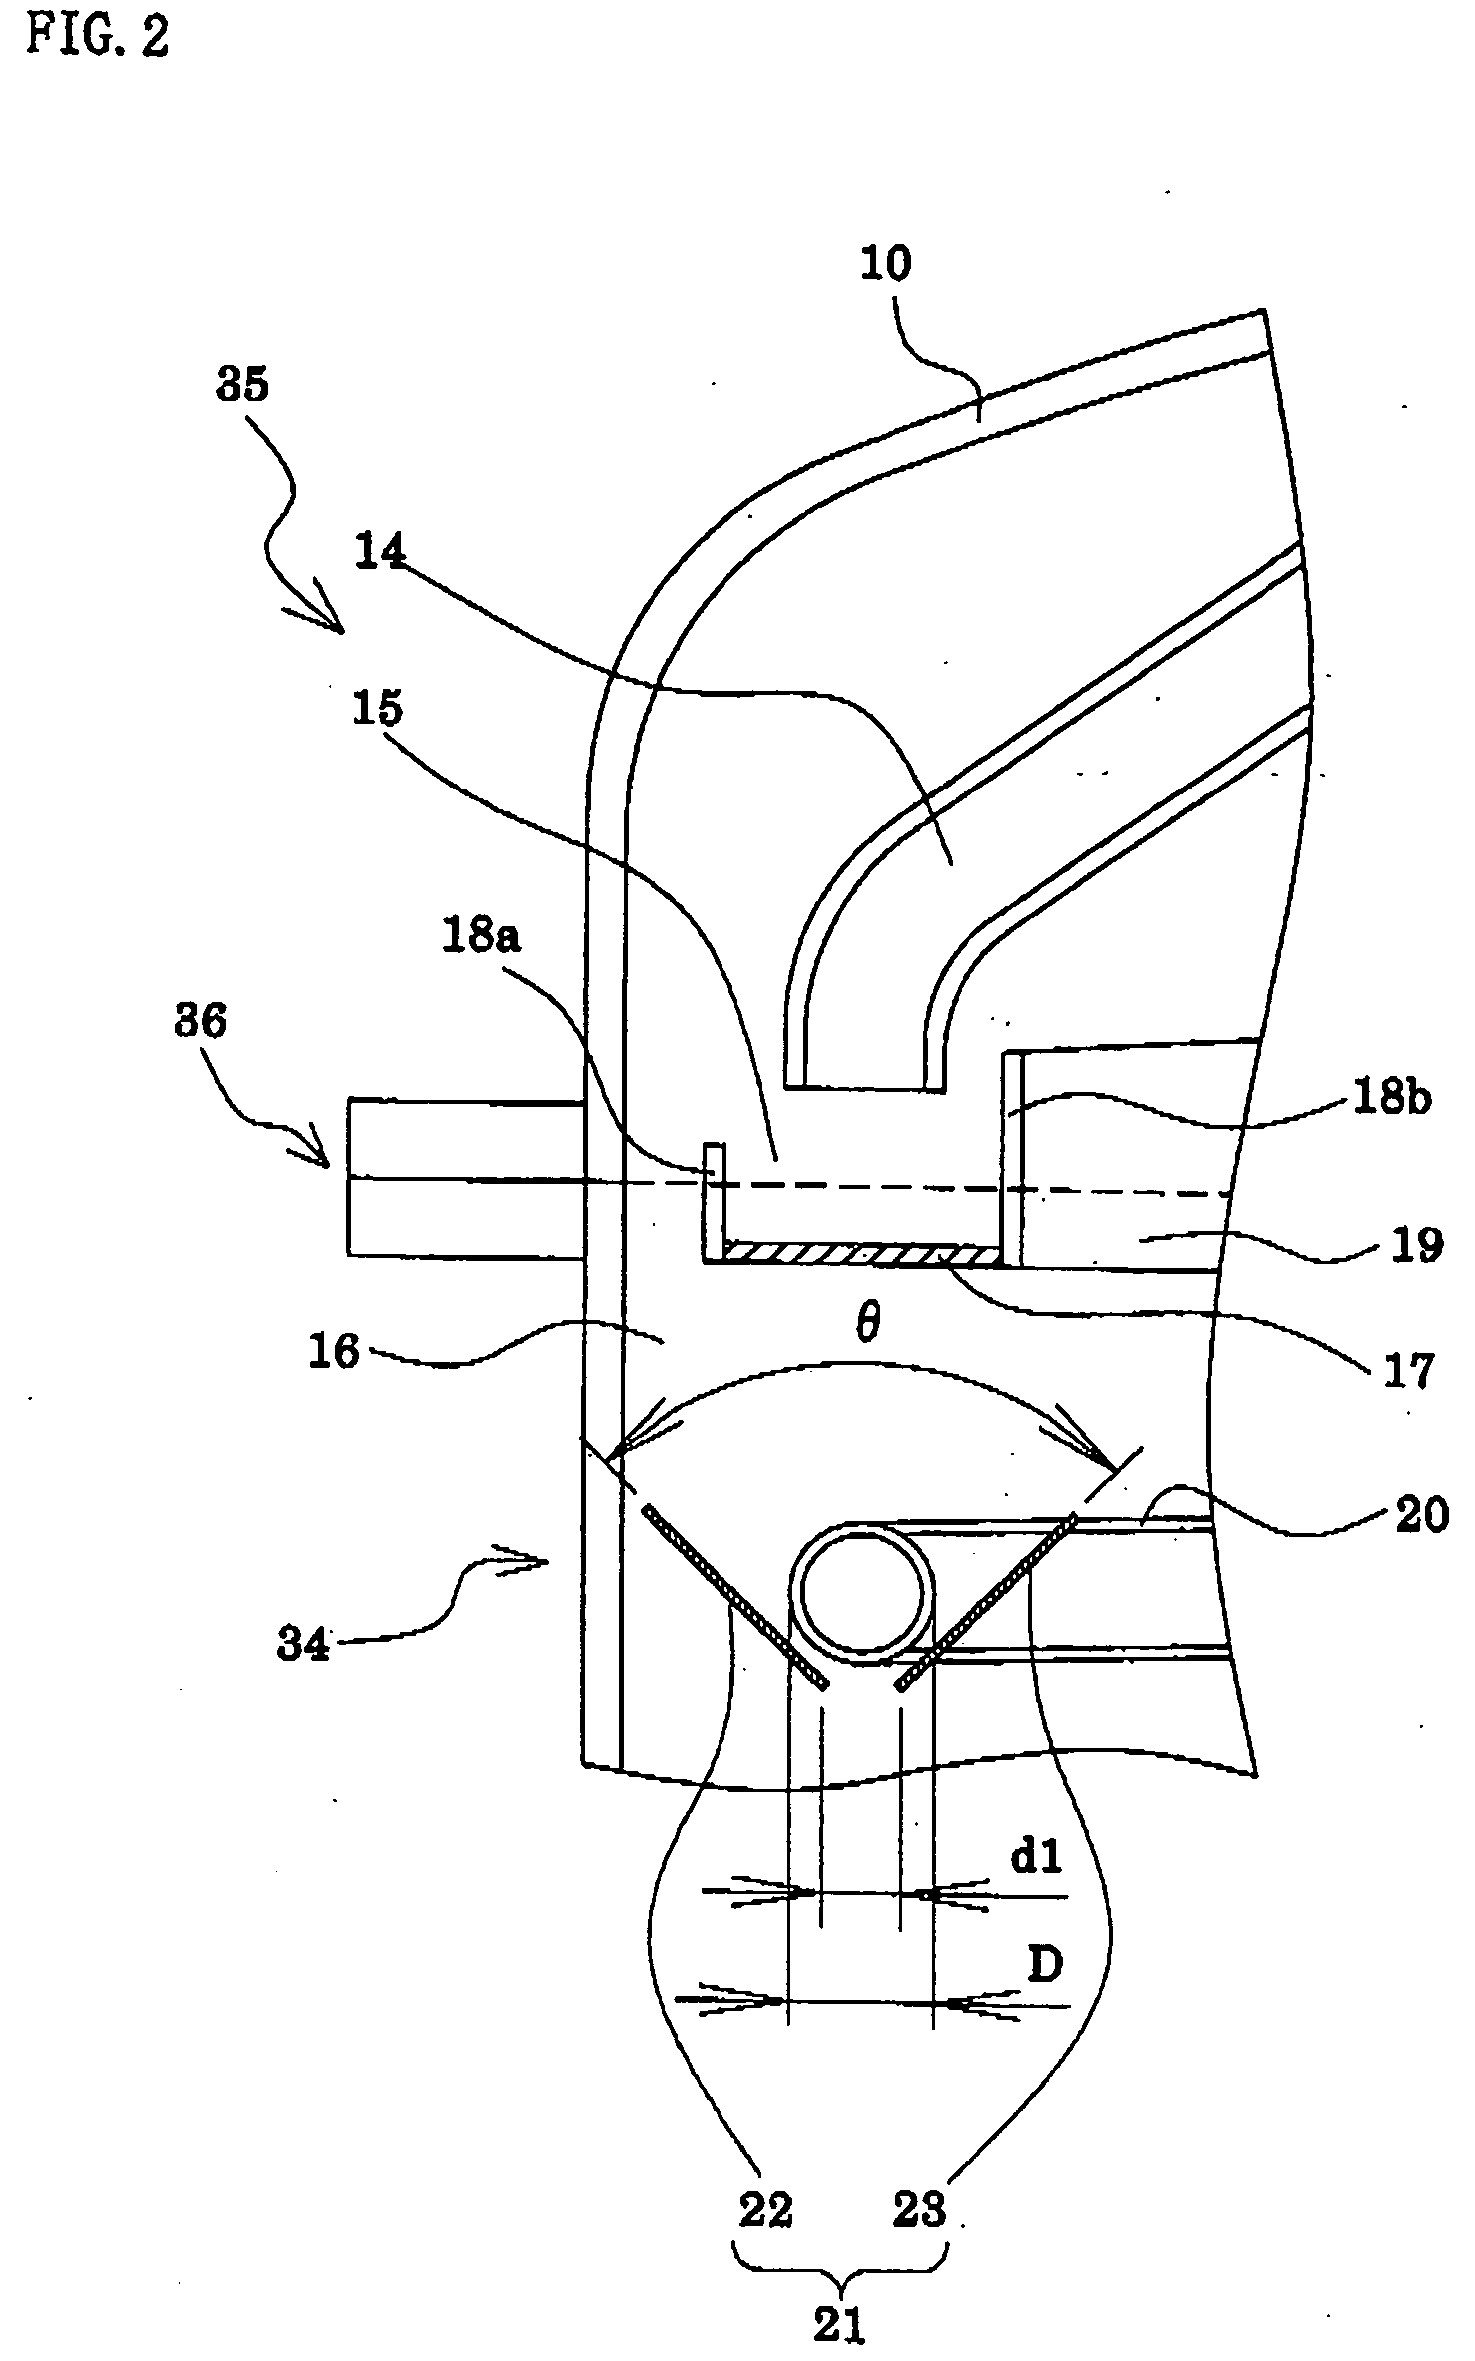 Apparatus for the separation and recovery of volume-reduced polystyrene resin gel